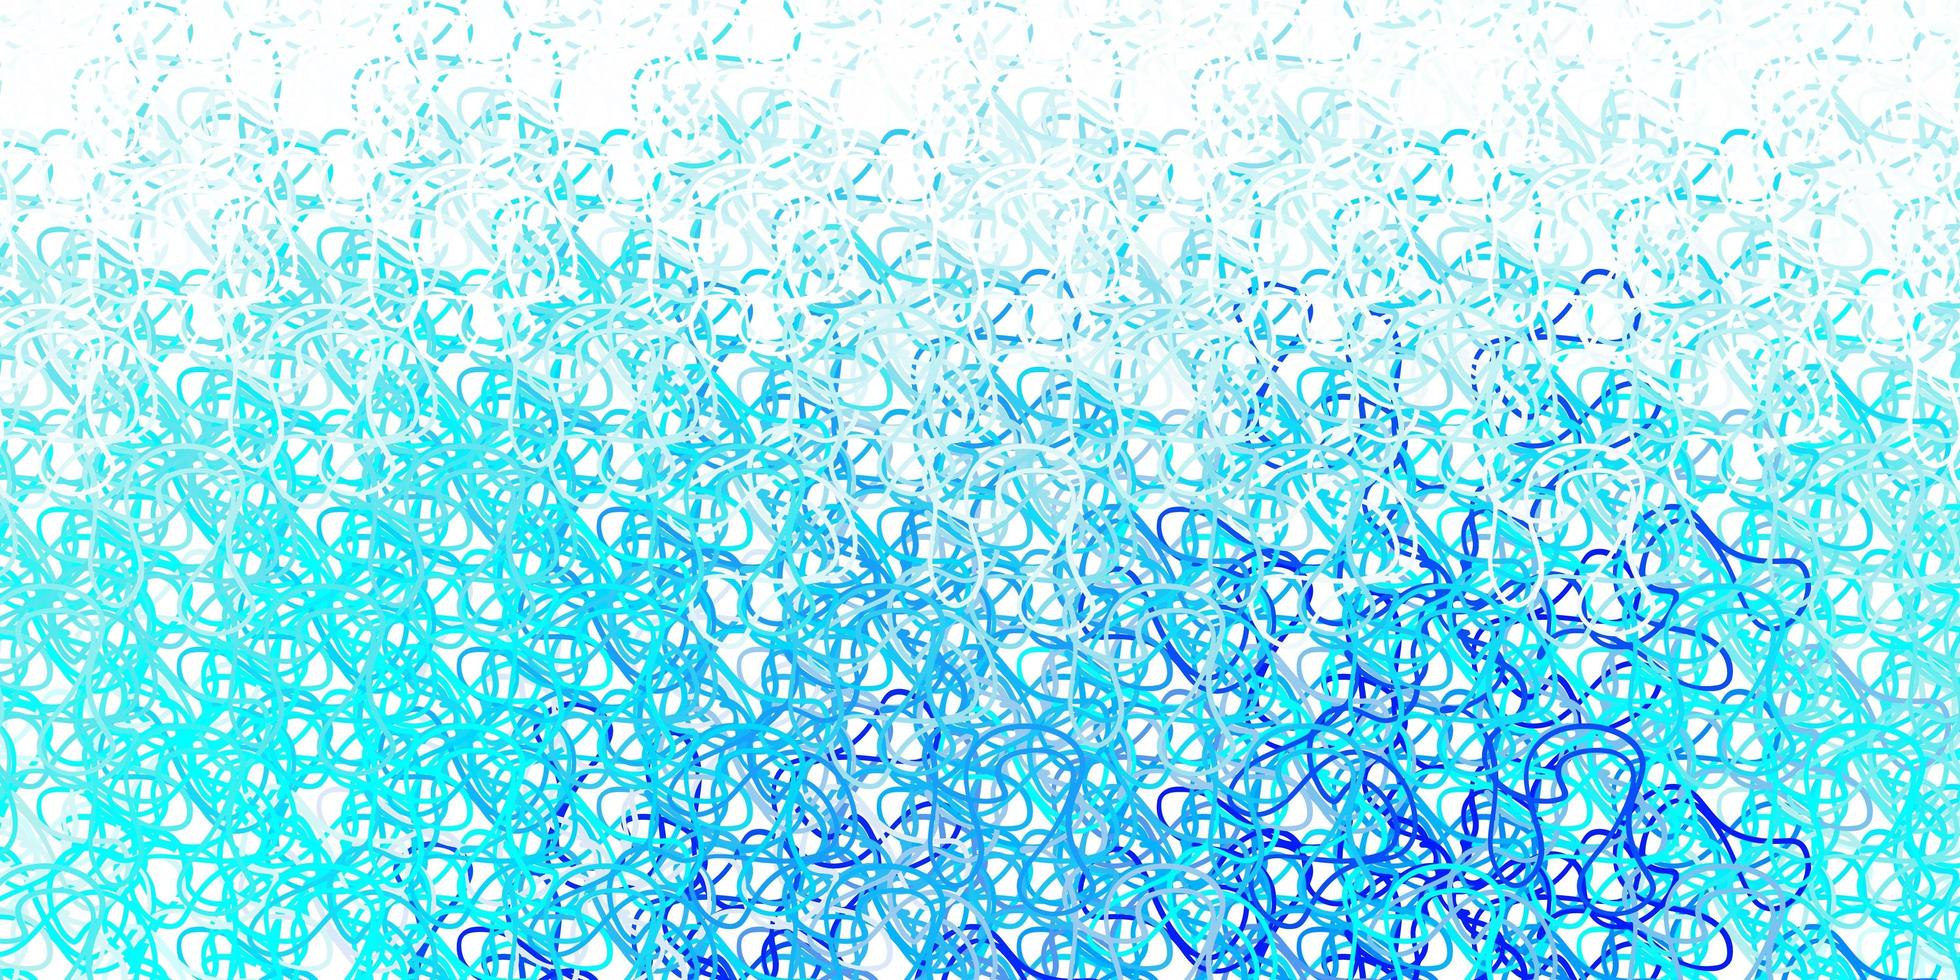 Light blue vector pattern with curved lines.